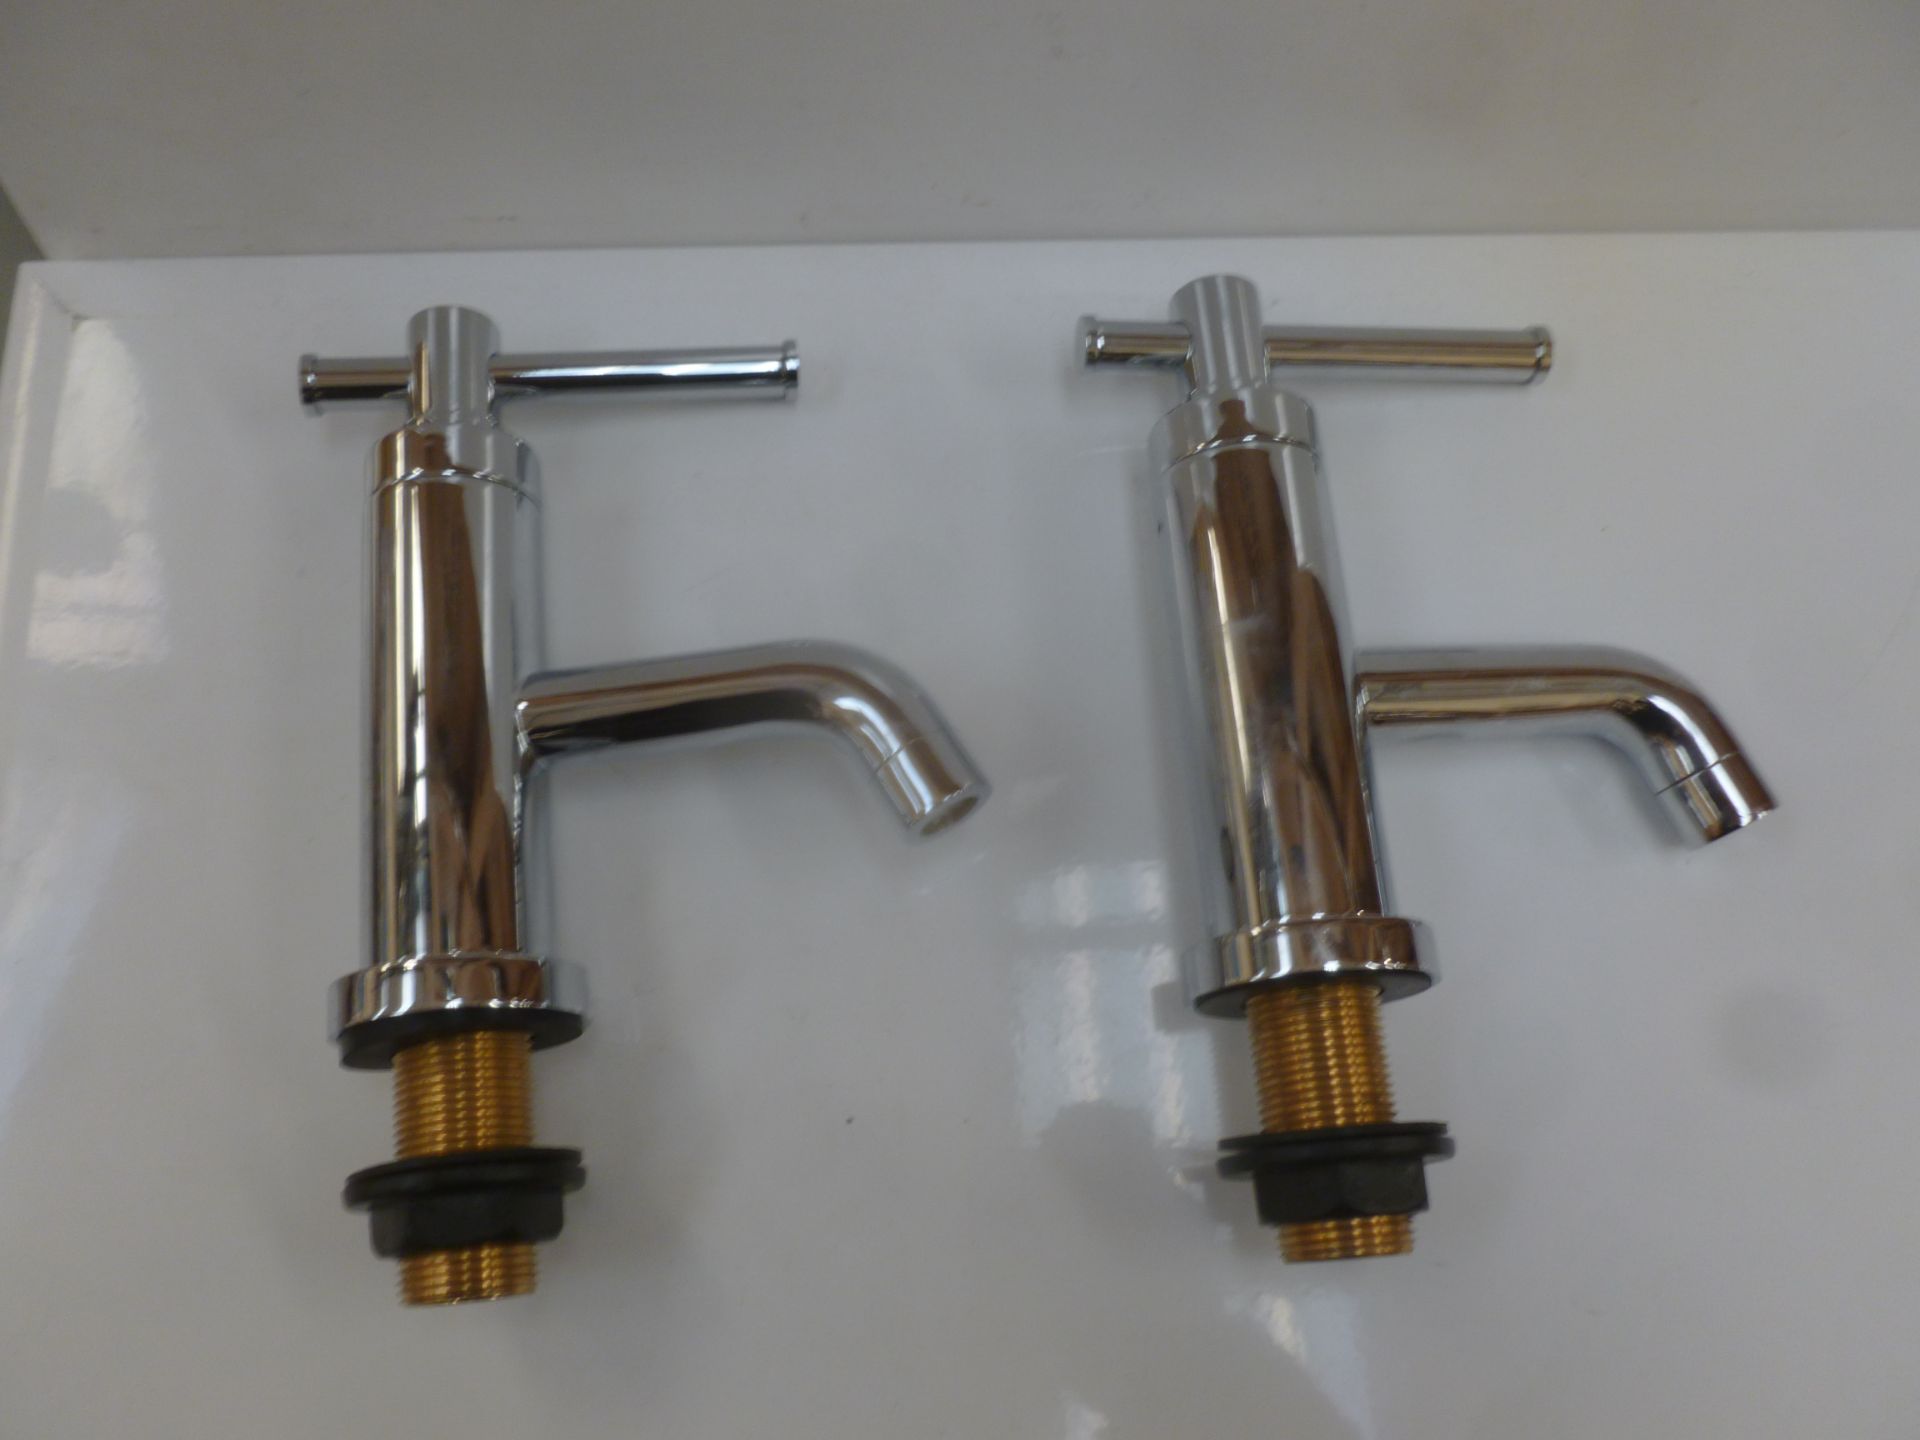 Heritage Chrome Shaker Bath Pillar Taps. New and boxed.